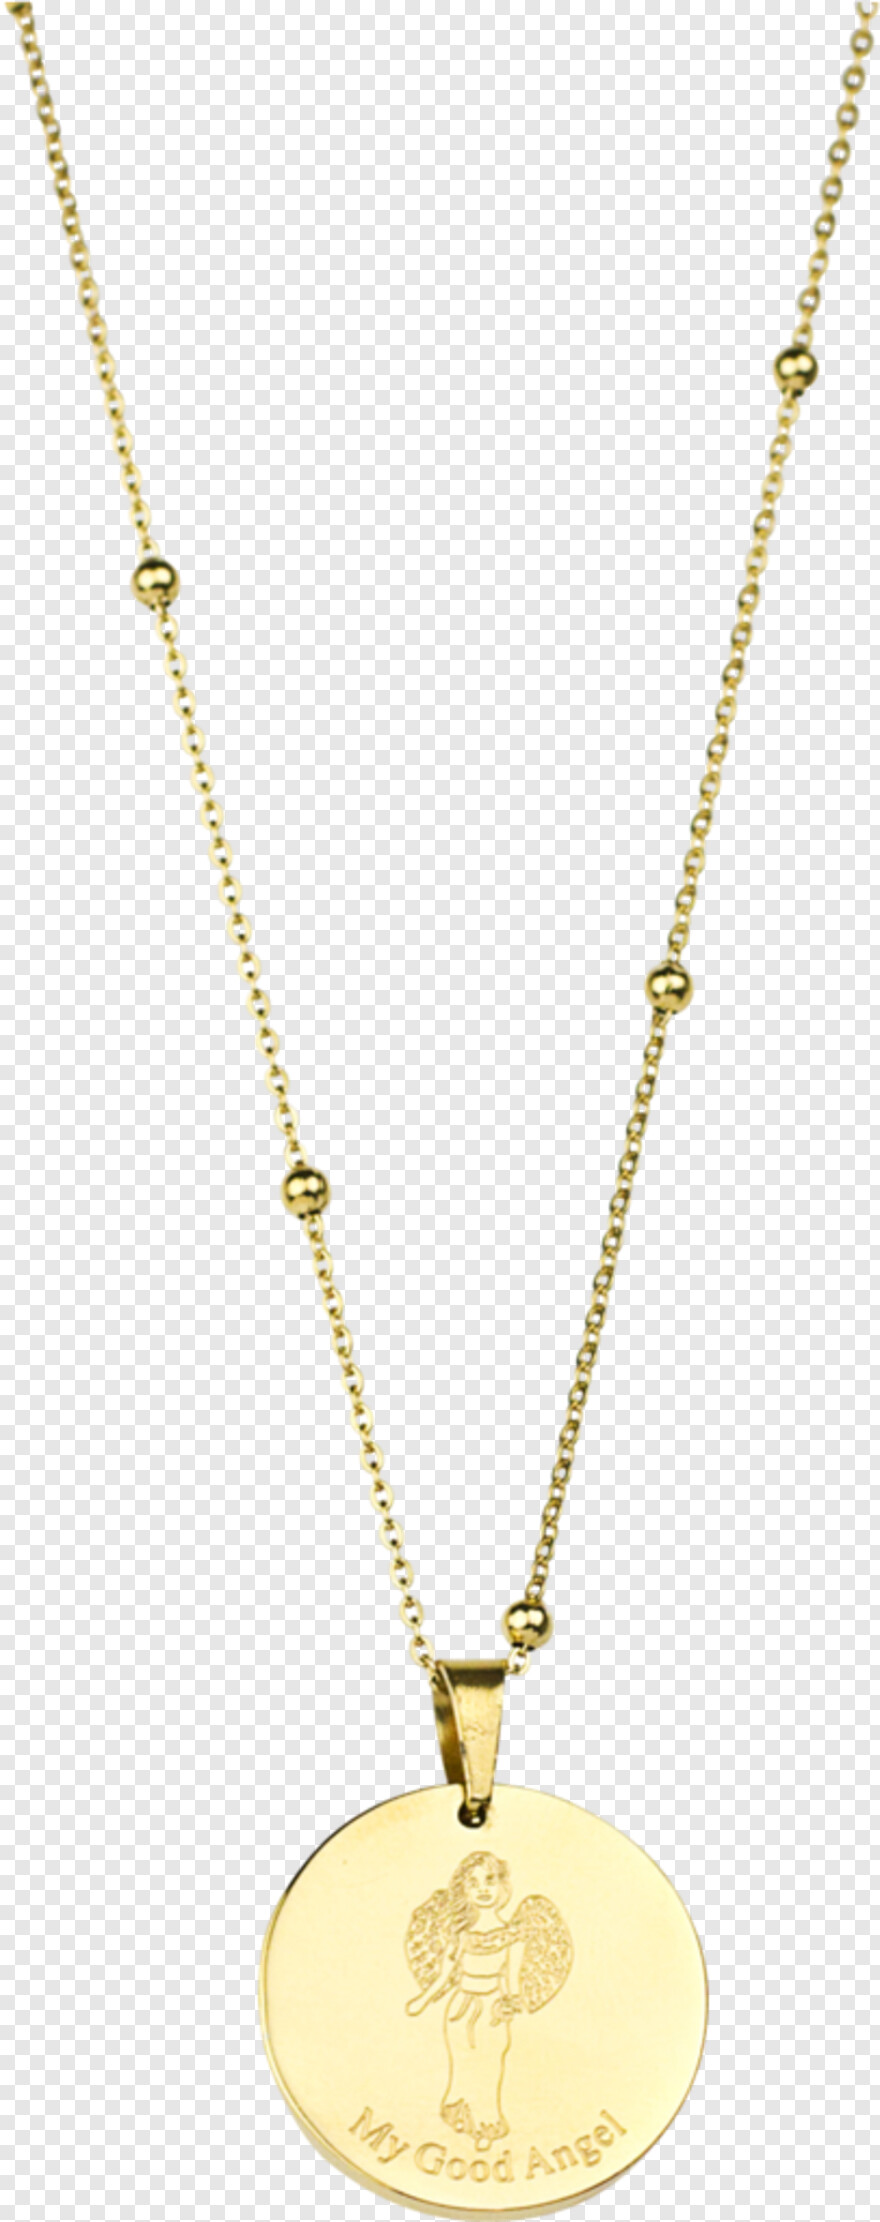 necklace-chain # 516197